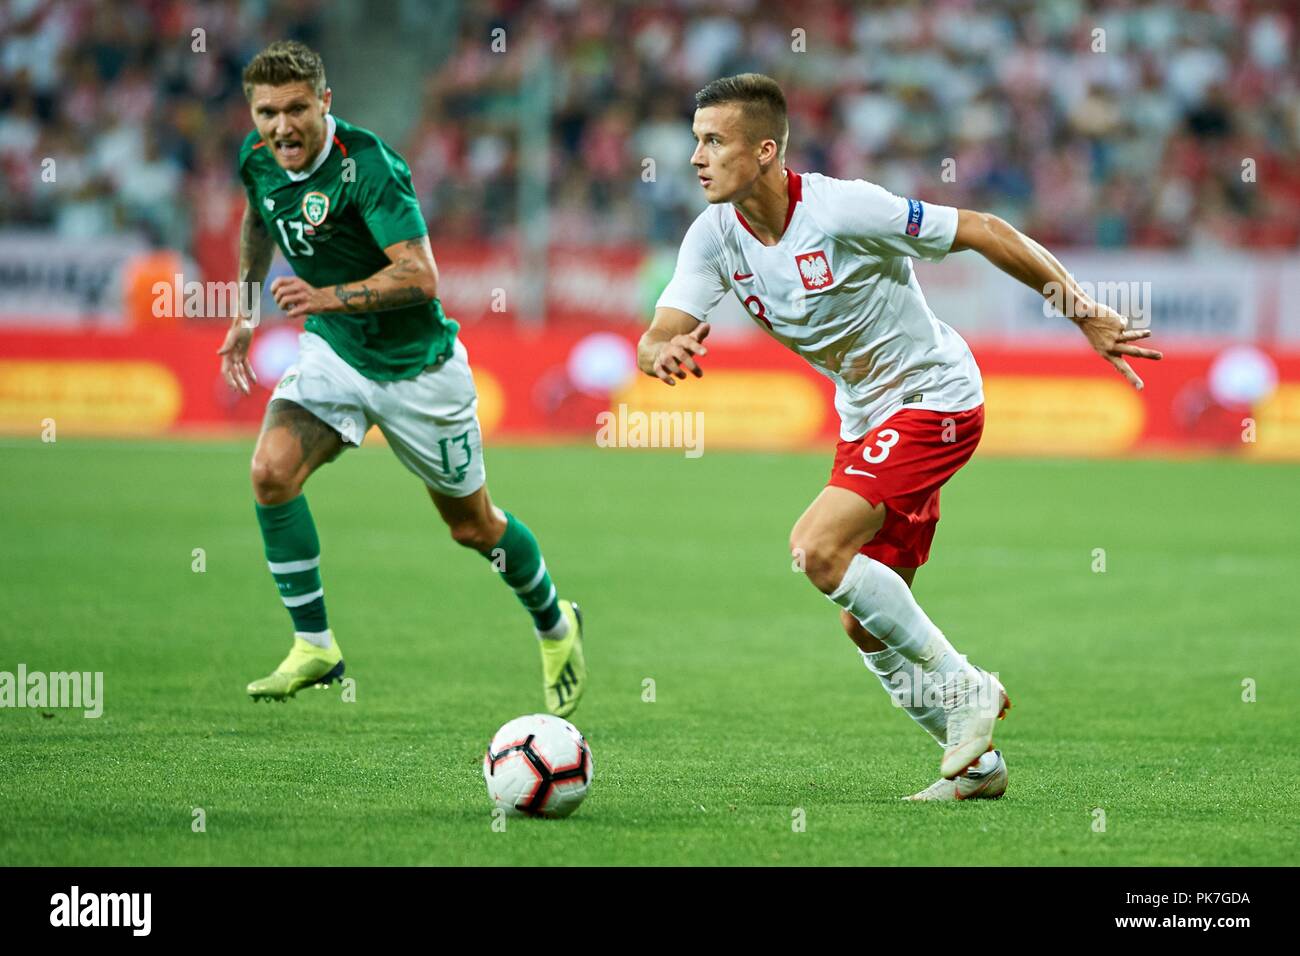 Wroclaw, Poland. 11th September 2018. Friendly game Poland v Republic of Ireland on September 11, 2018 in Wroclaw, Poland. In the picture: Jeff Hendrick, Arkadiusz Reca Credit: East News sp. z o.o./Alamy Live News Stock Photo